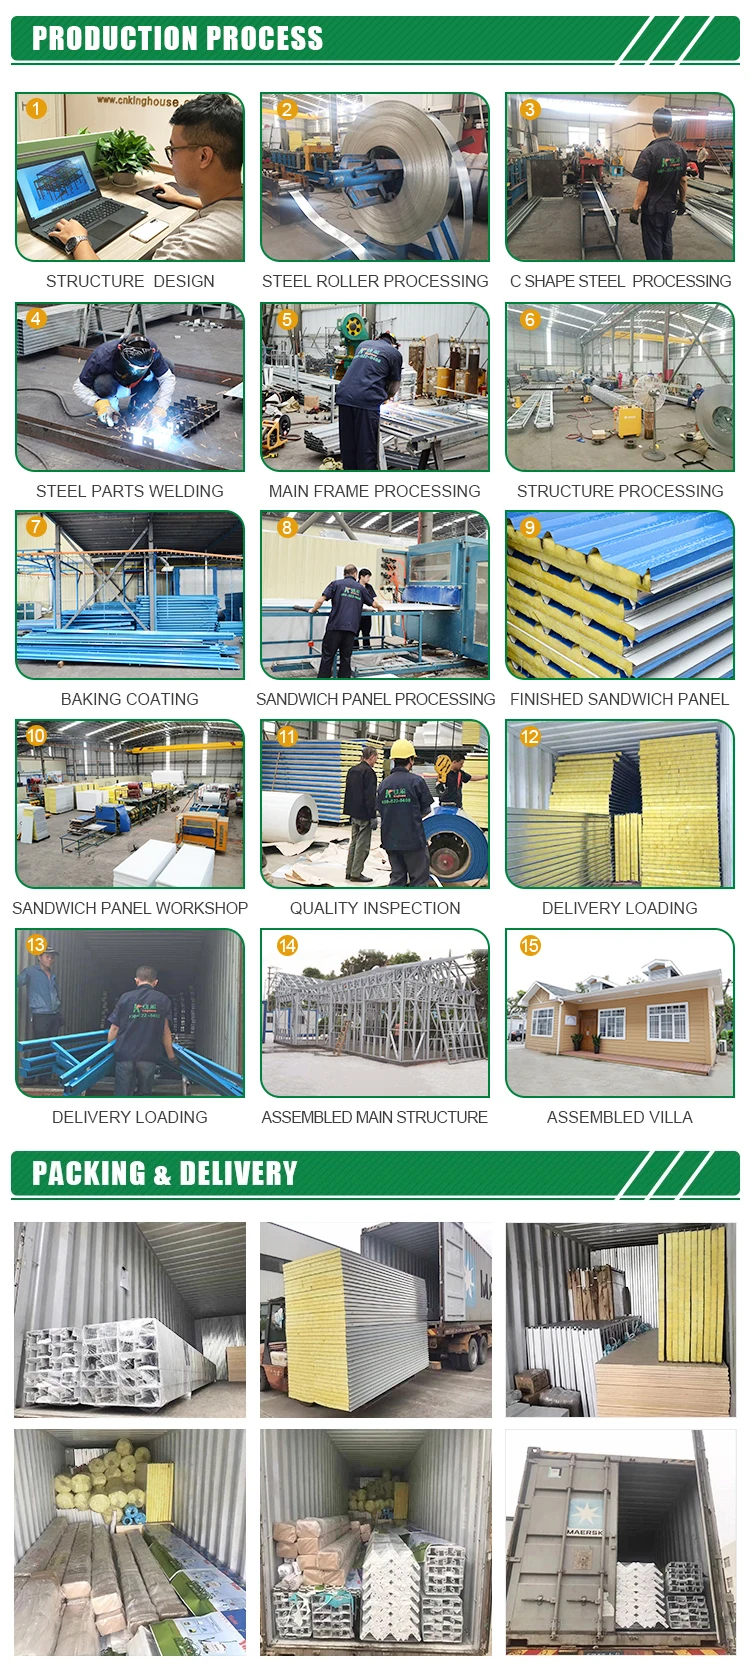 prefabricated house container